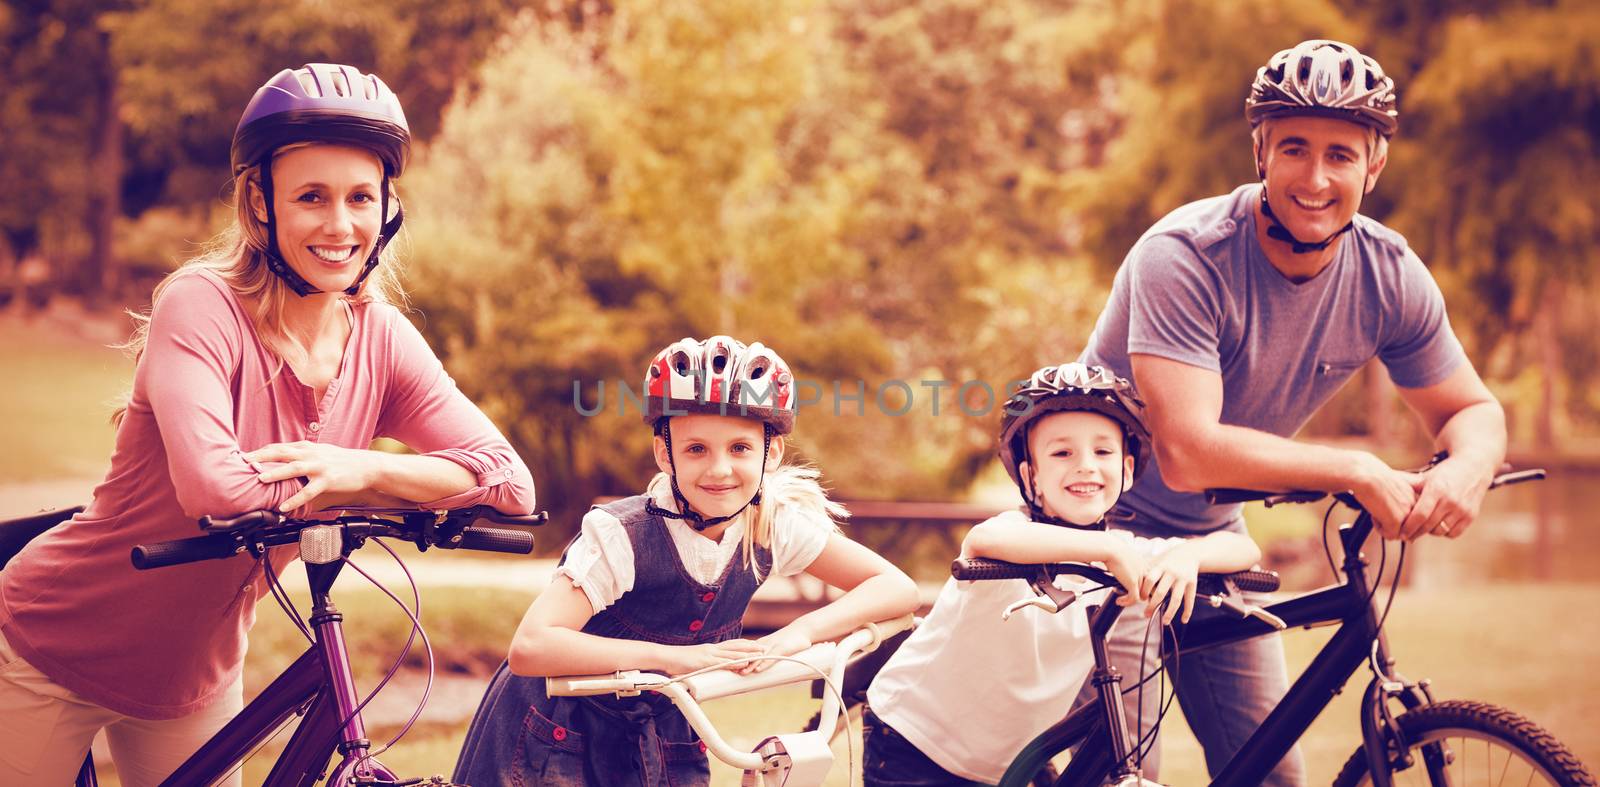 Happy family on bicycle at park  by Wavebreakmedia